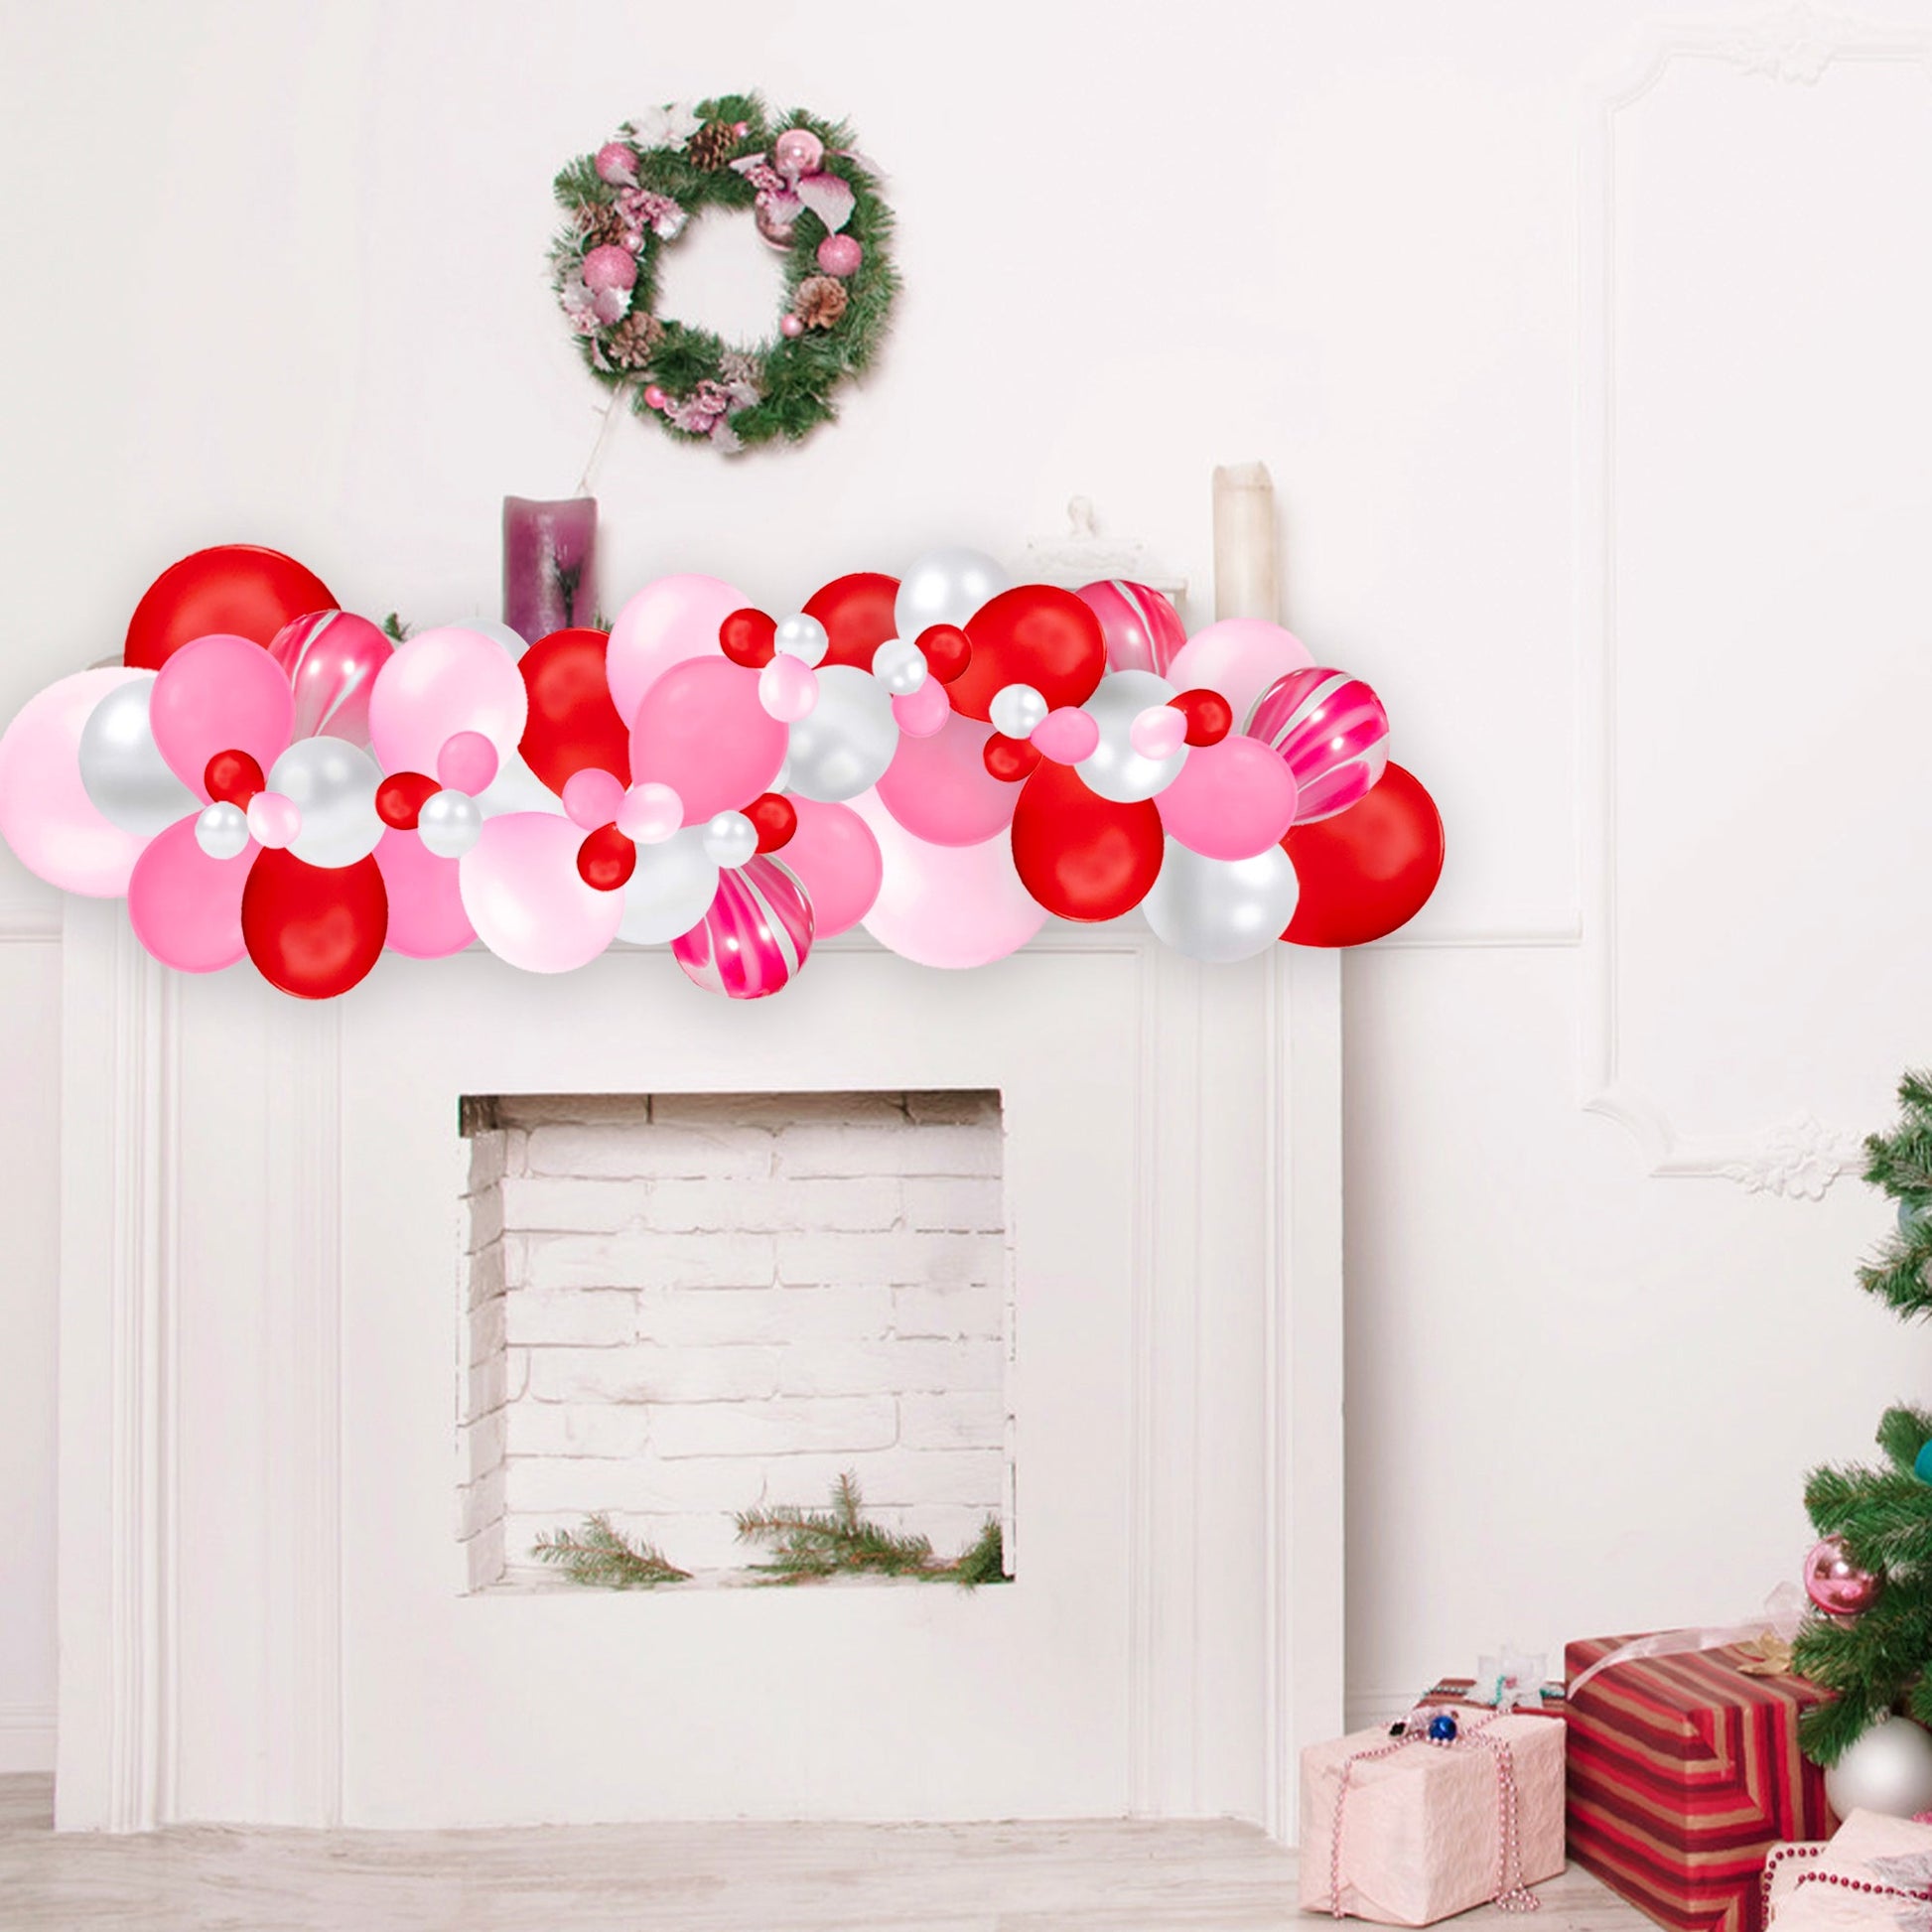 Pink & Red Candy Cane Christmas Balloon Garland Kit - Ellie's Party Supply